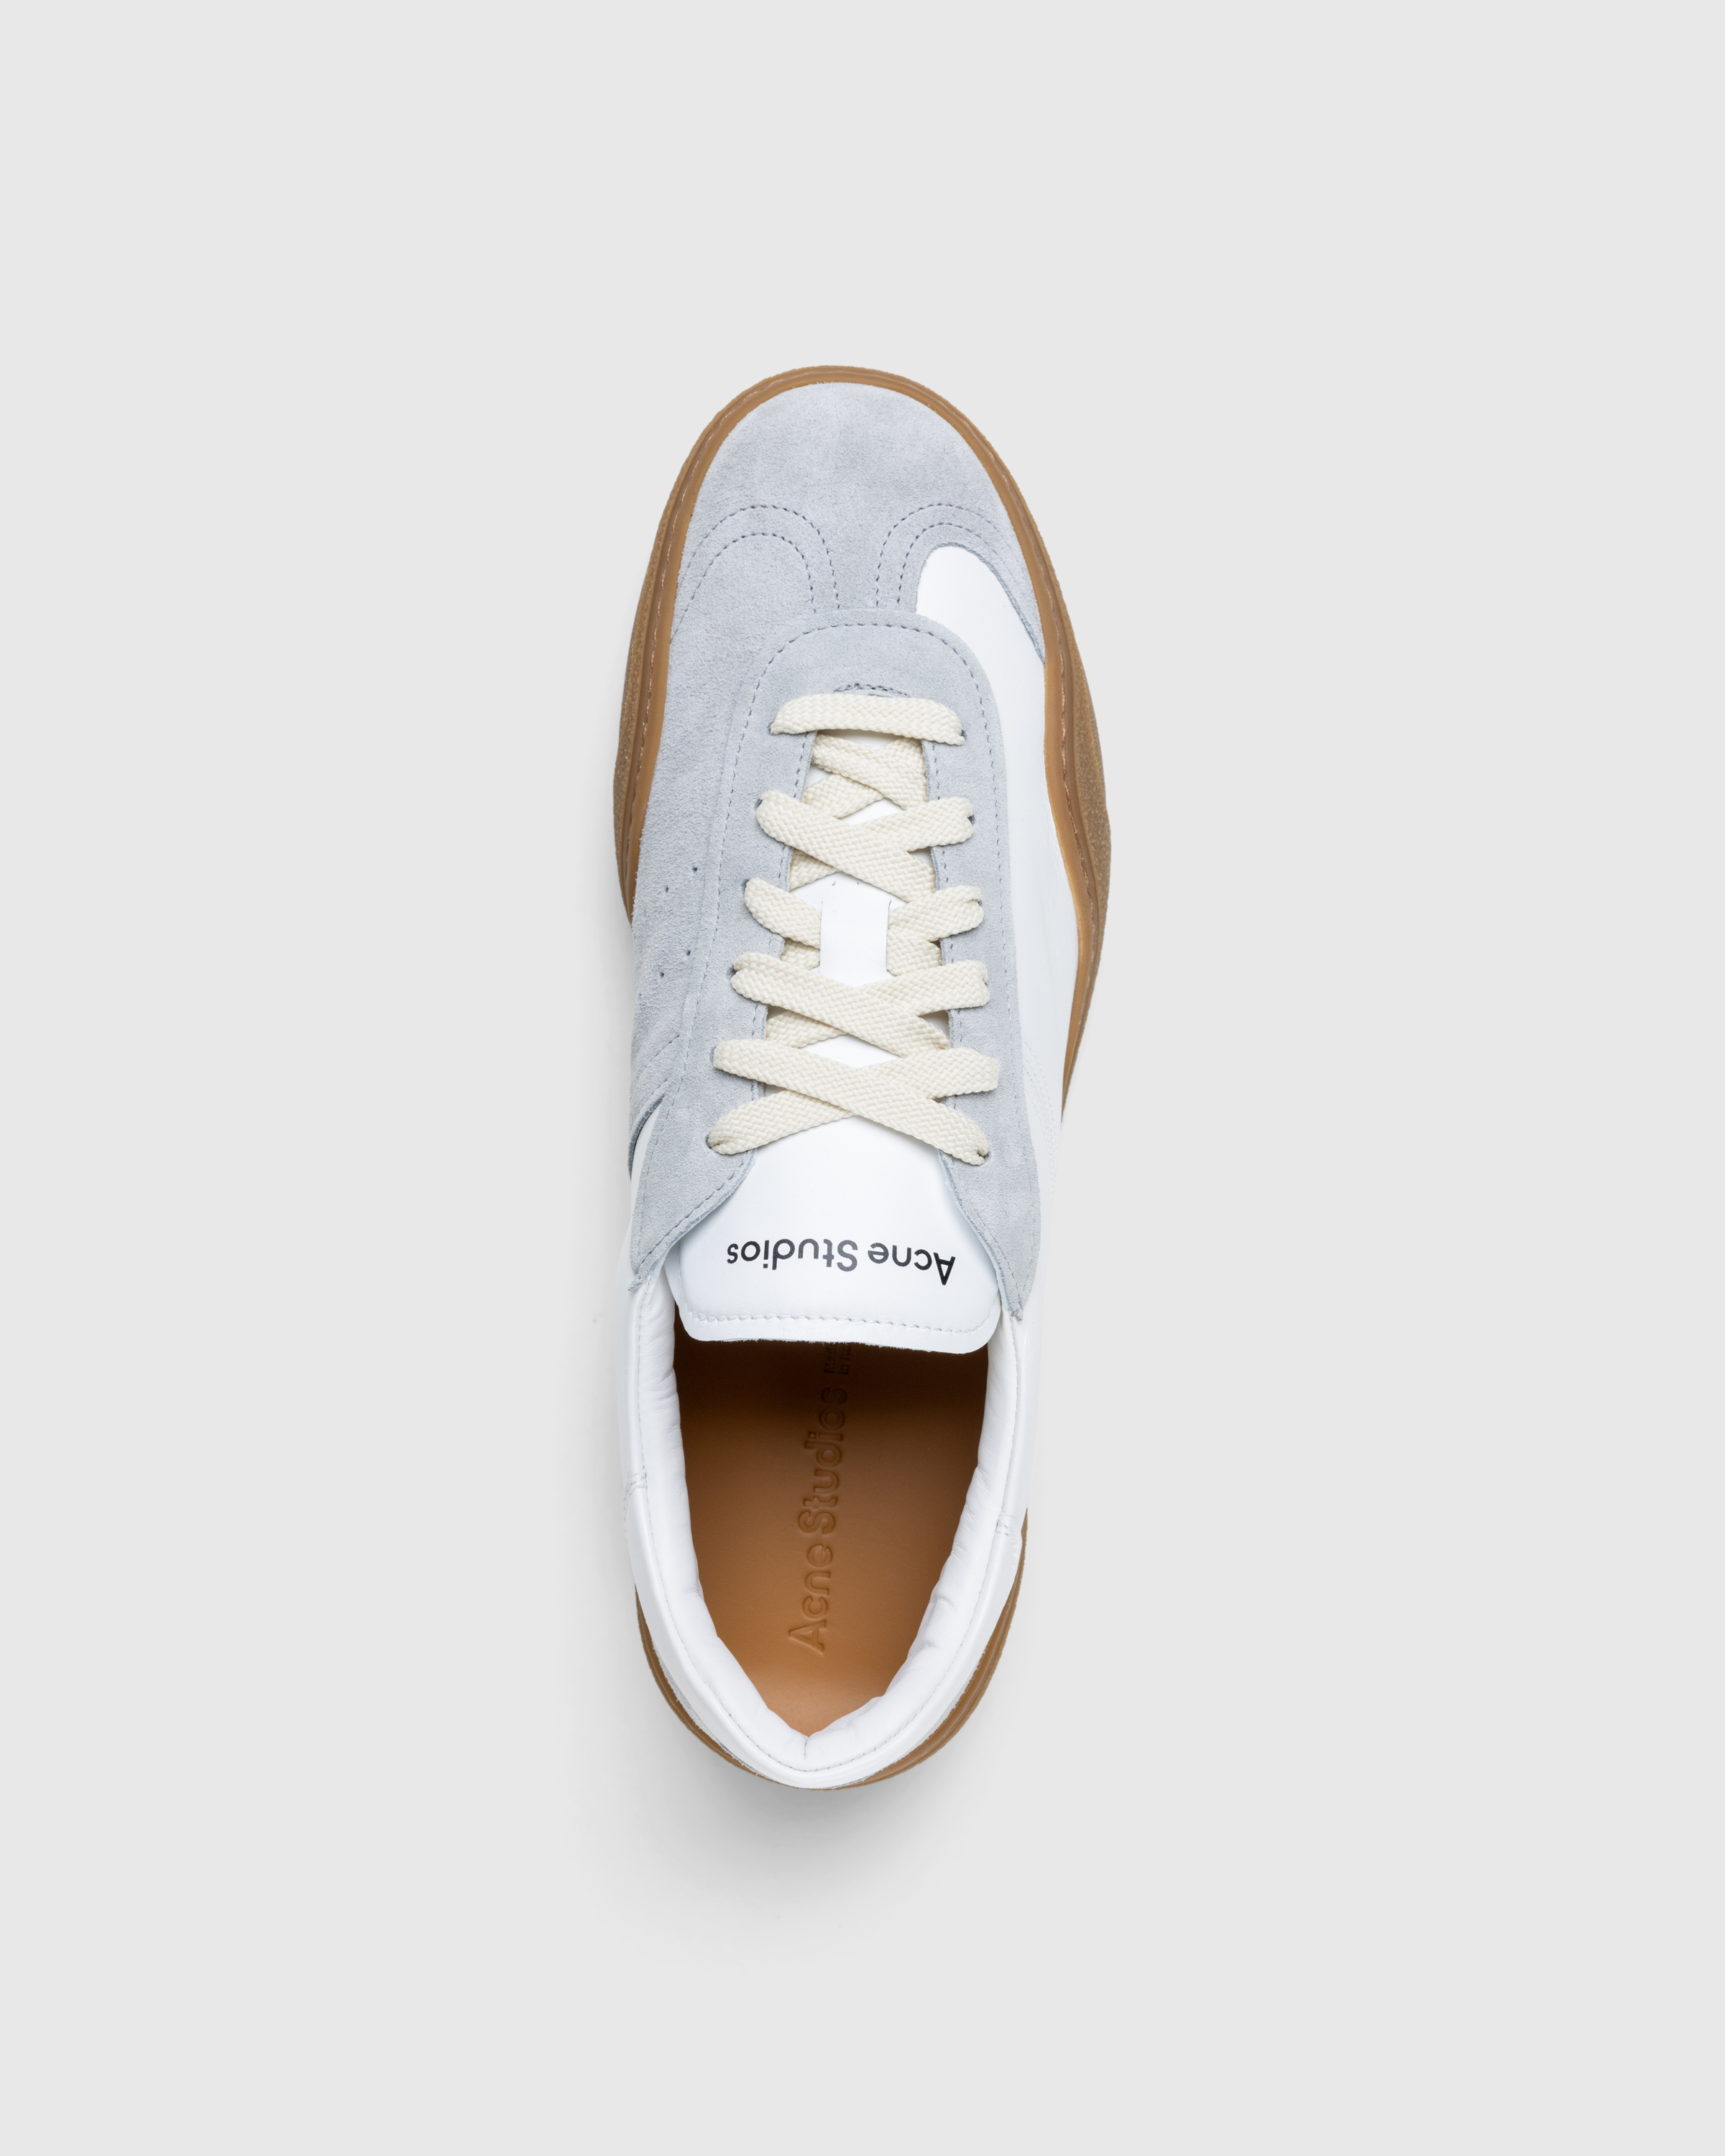 Acne Studios – Lace-Up Sneakers White/Brown - Low Top Sneakers - White - Image 5